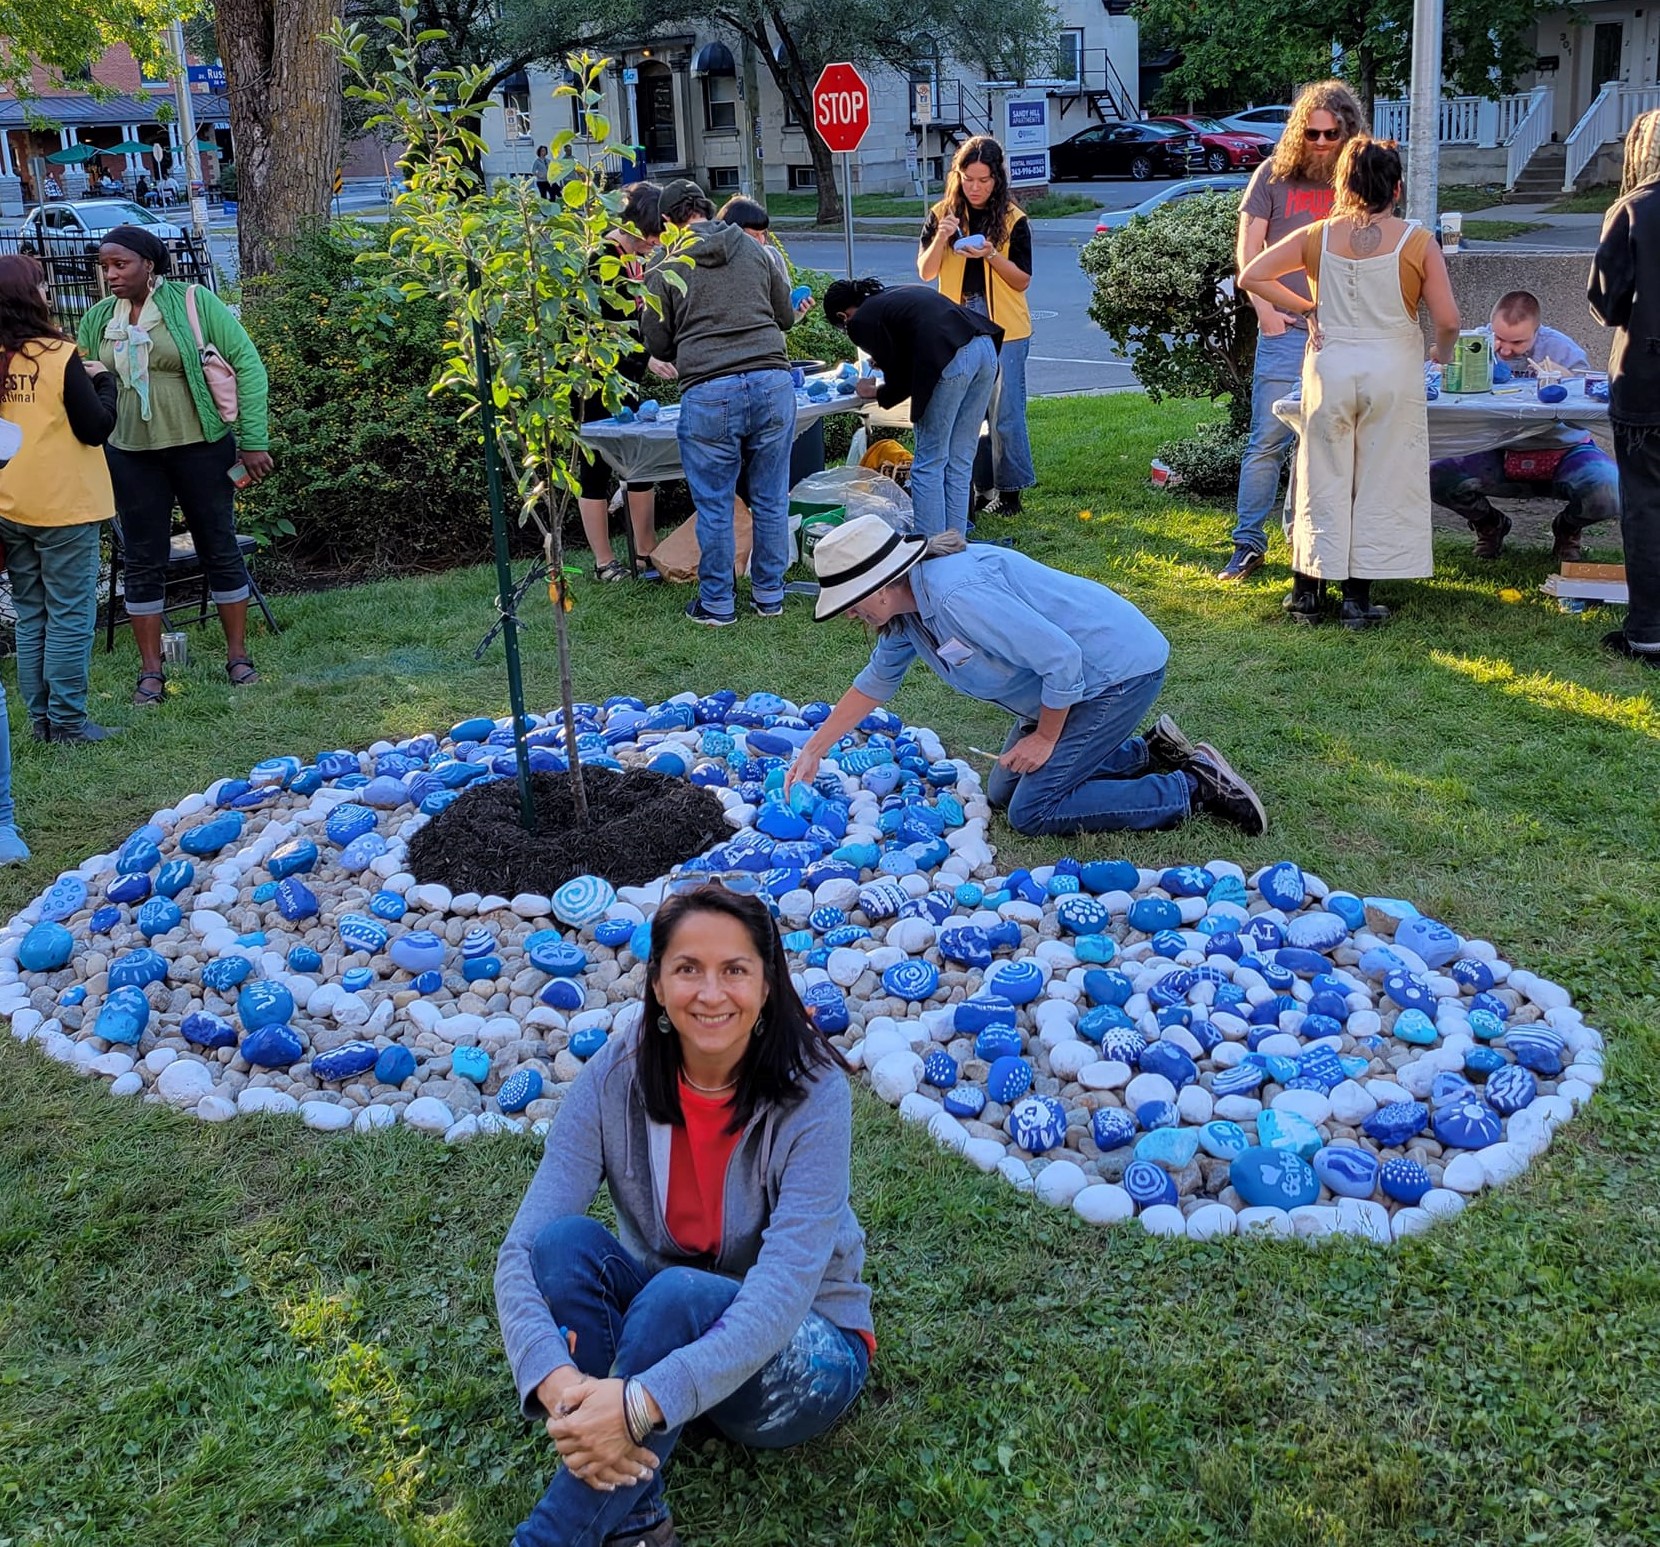 People paint blue and white stones stones to add to a swirling "river" of stones around a tree.
